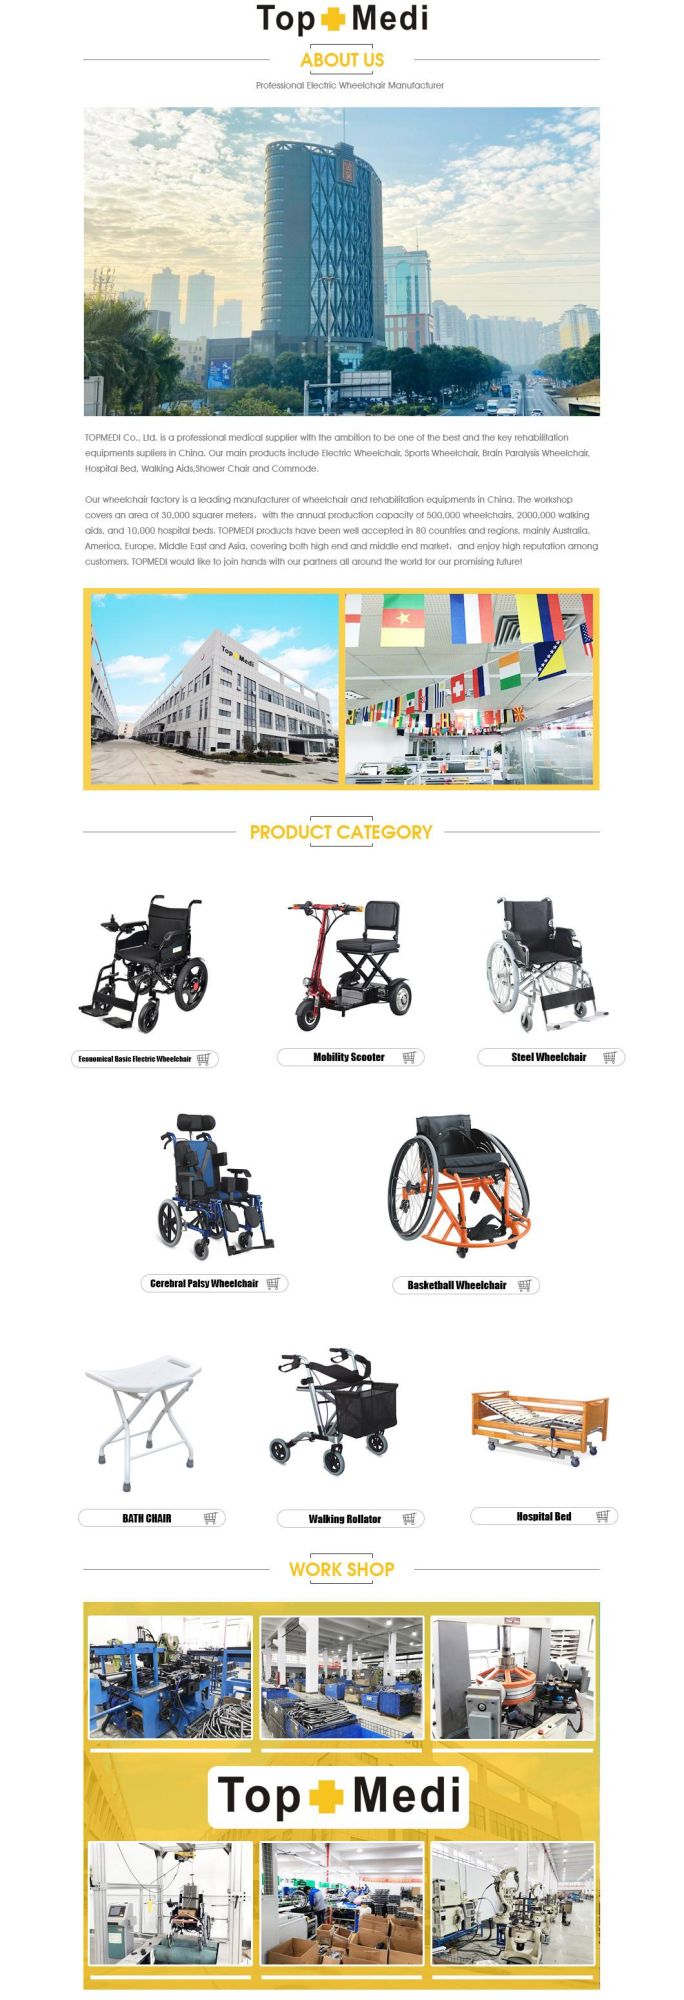 High Quality Standing Aids New Rollator Product Walker